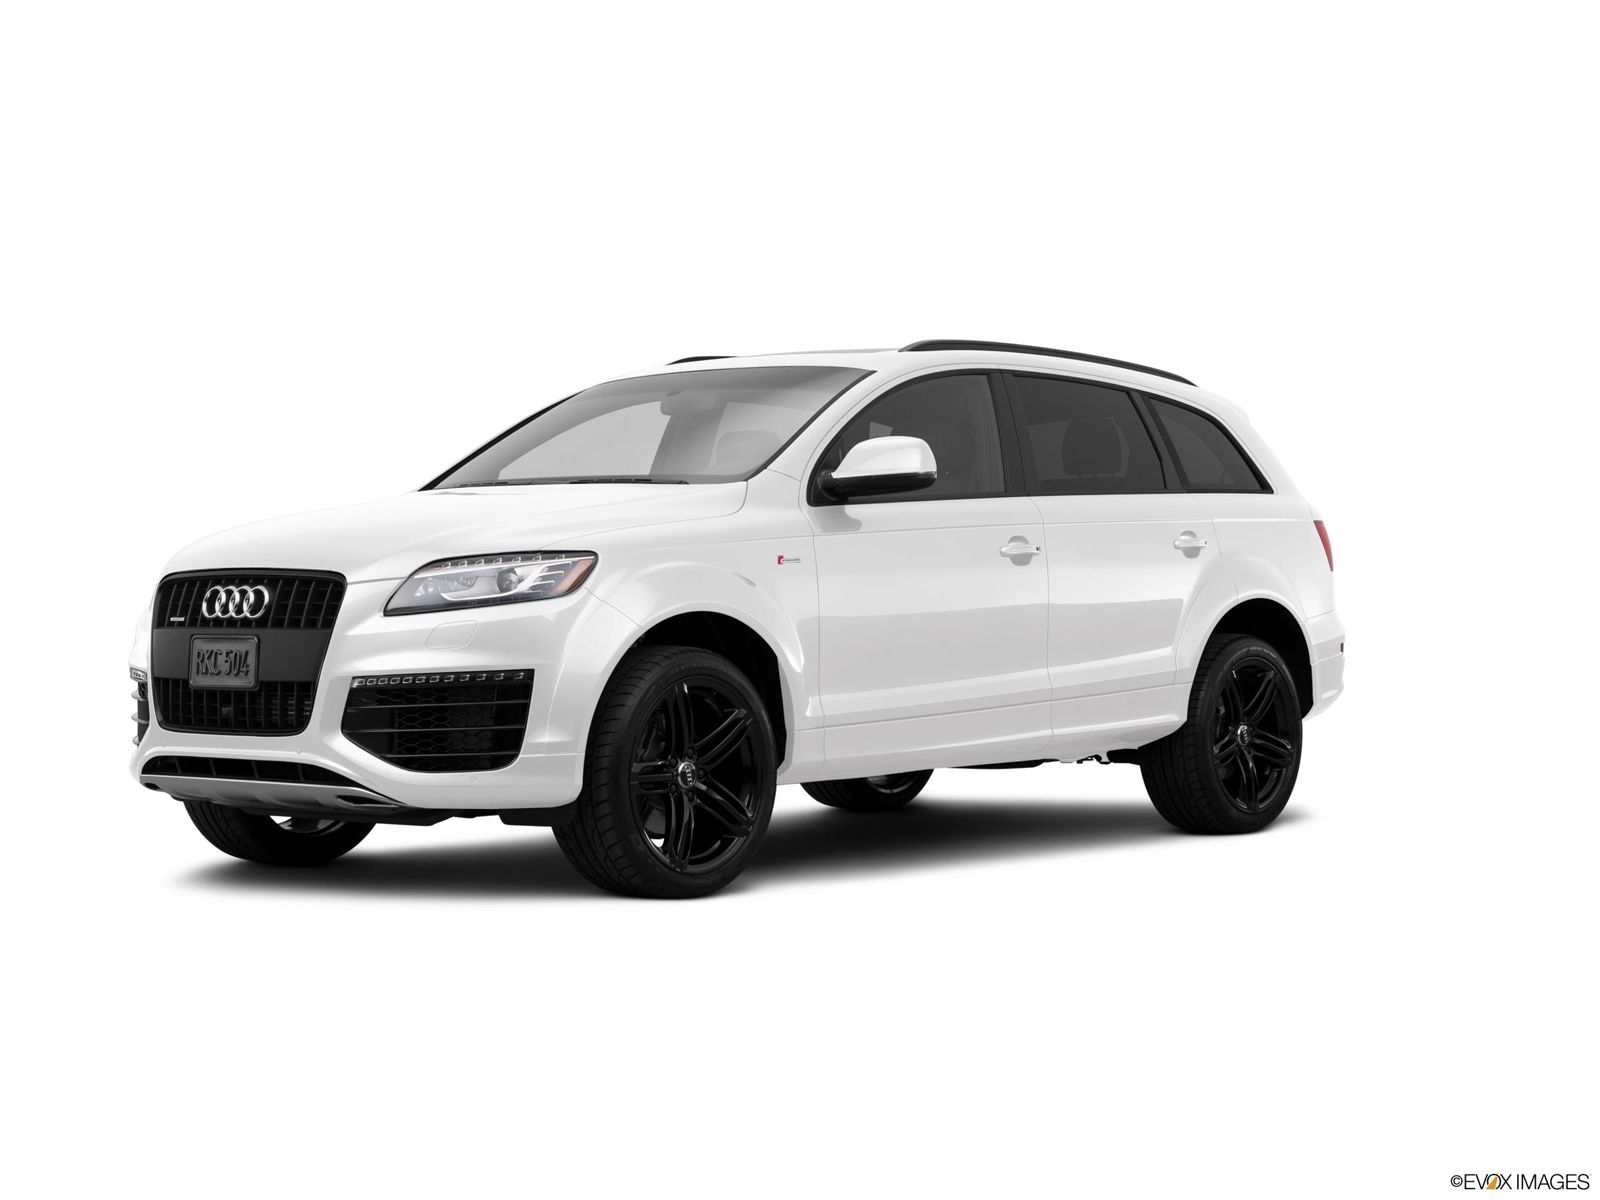 2015 Audi Q7 Research, Photos, Specs and Expertise | CarMax